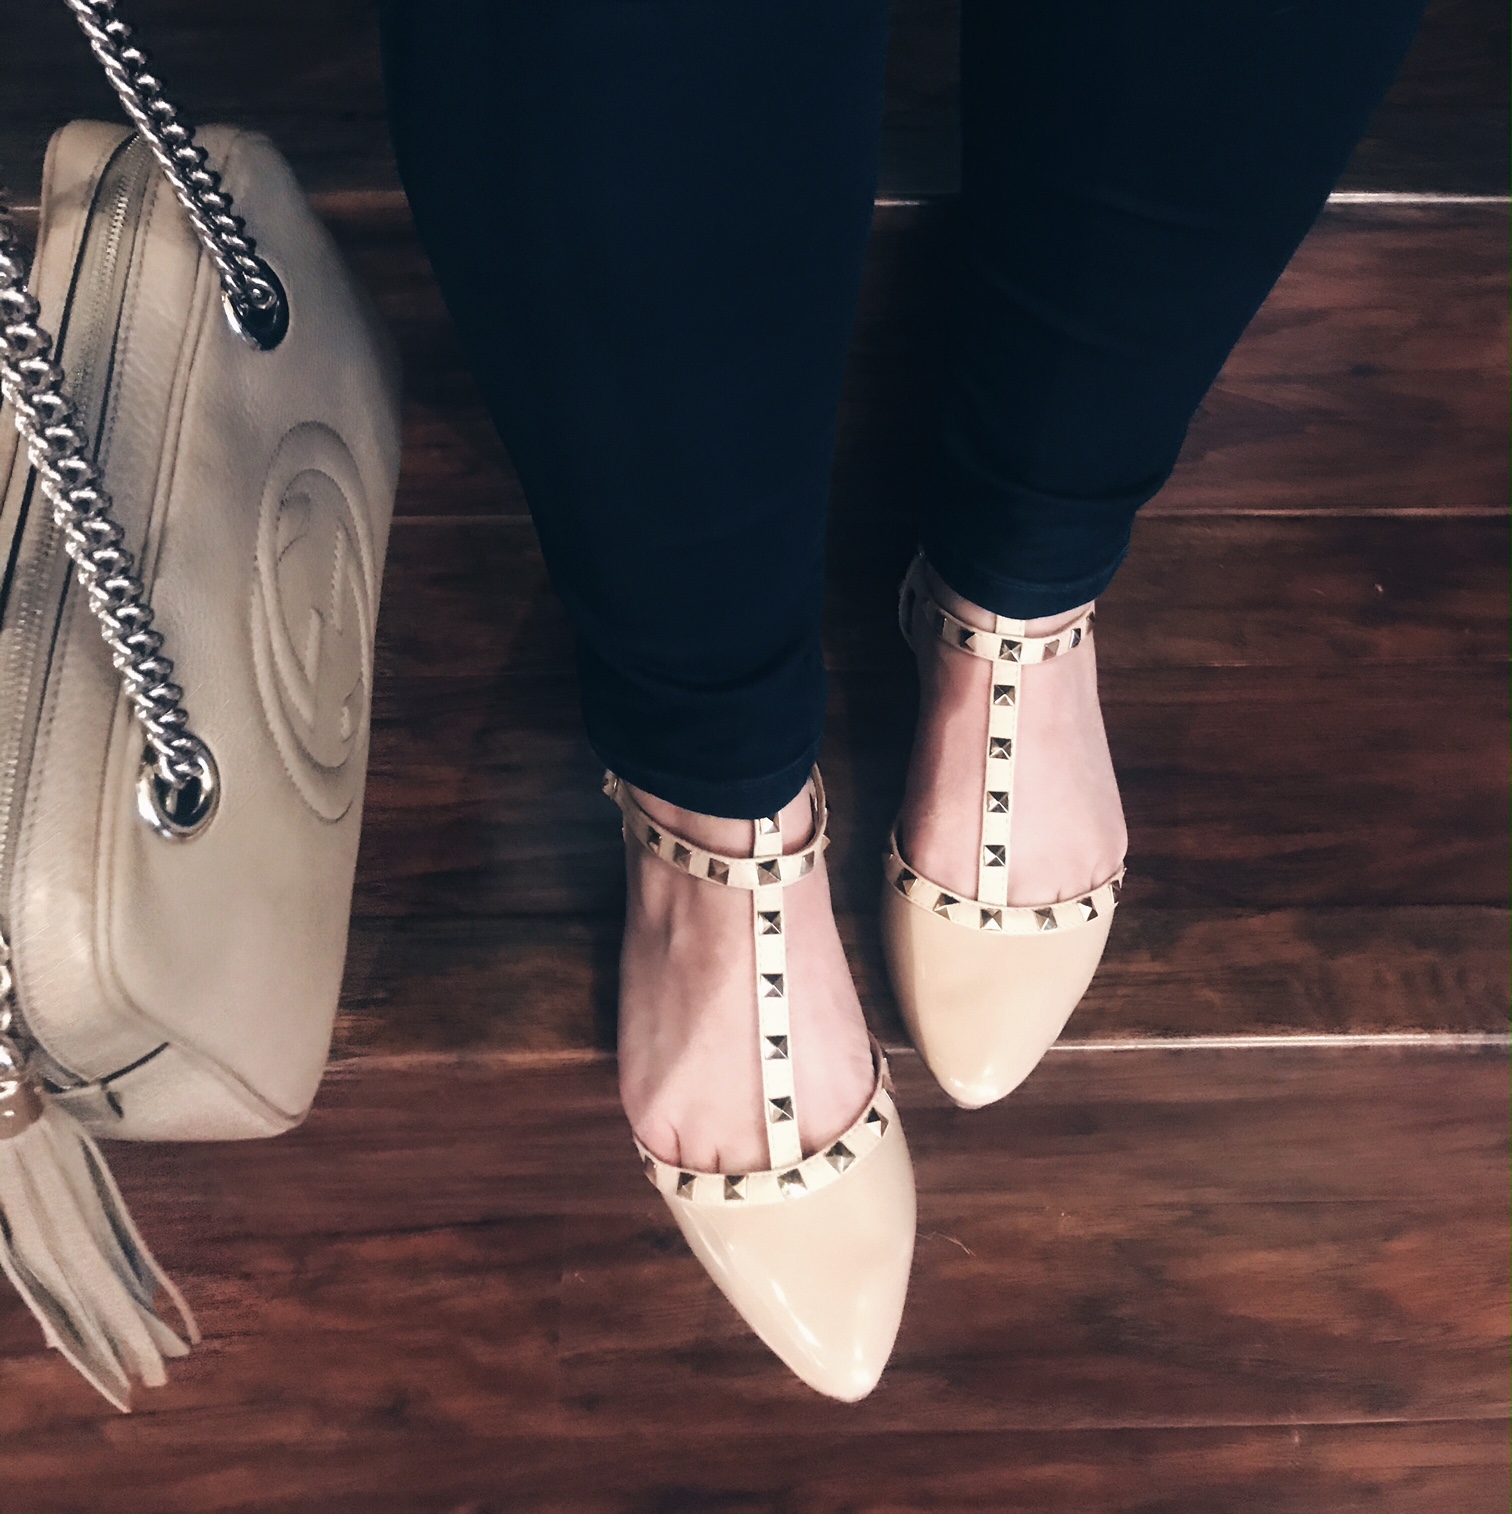 The Look For Less: Studded Shoes - Vilma Iris | Lifestyle Blogger